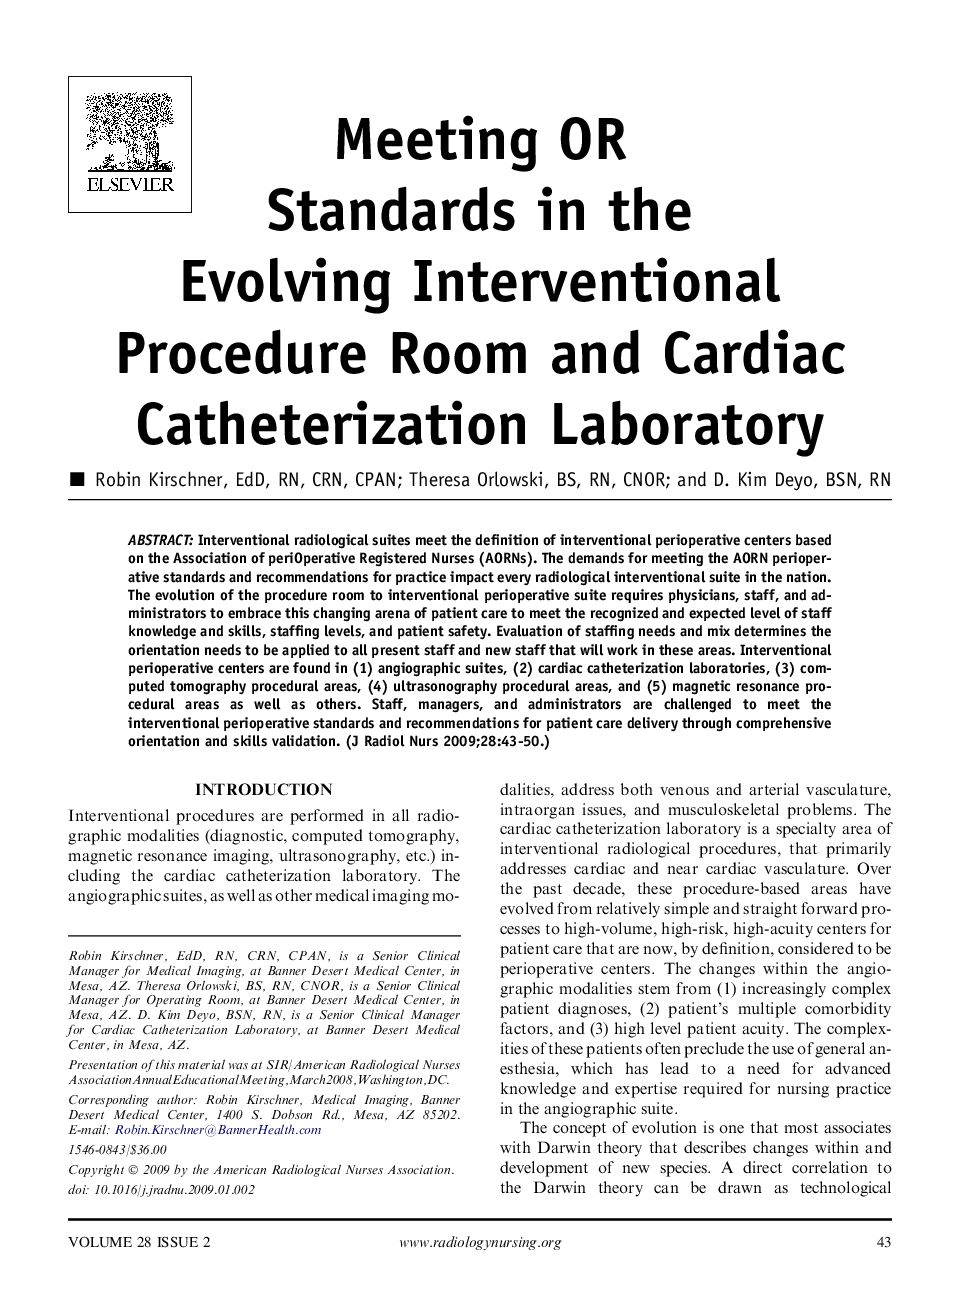 Meeting OR Standards in the Evolving Interventional Procedure Room and Cardiac Catheterization Laboratory 